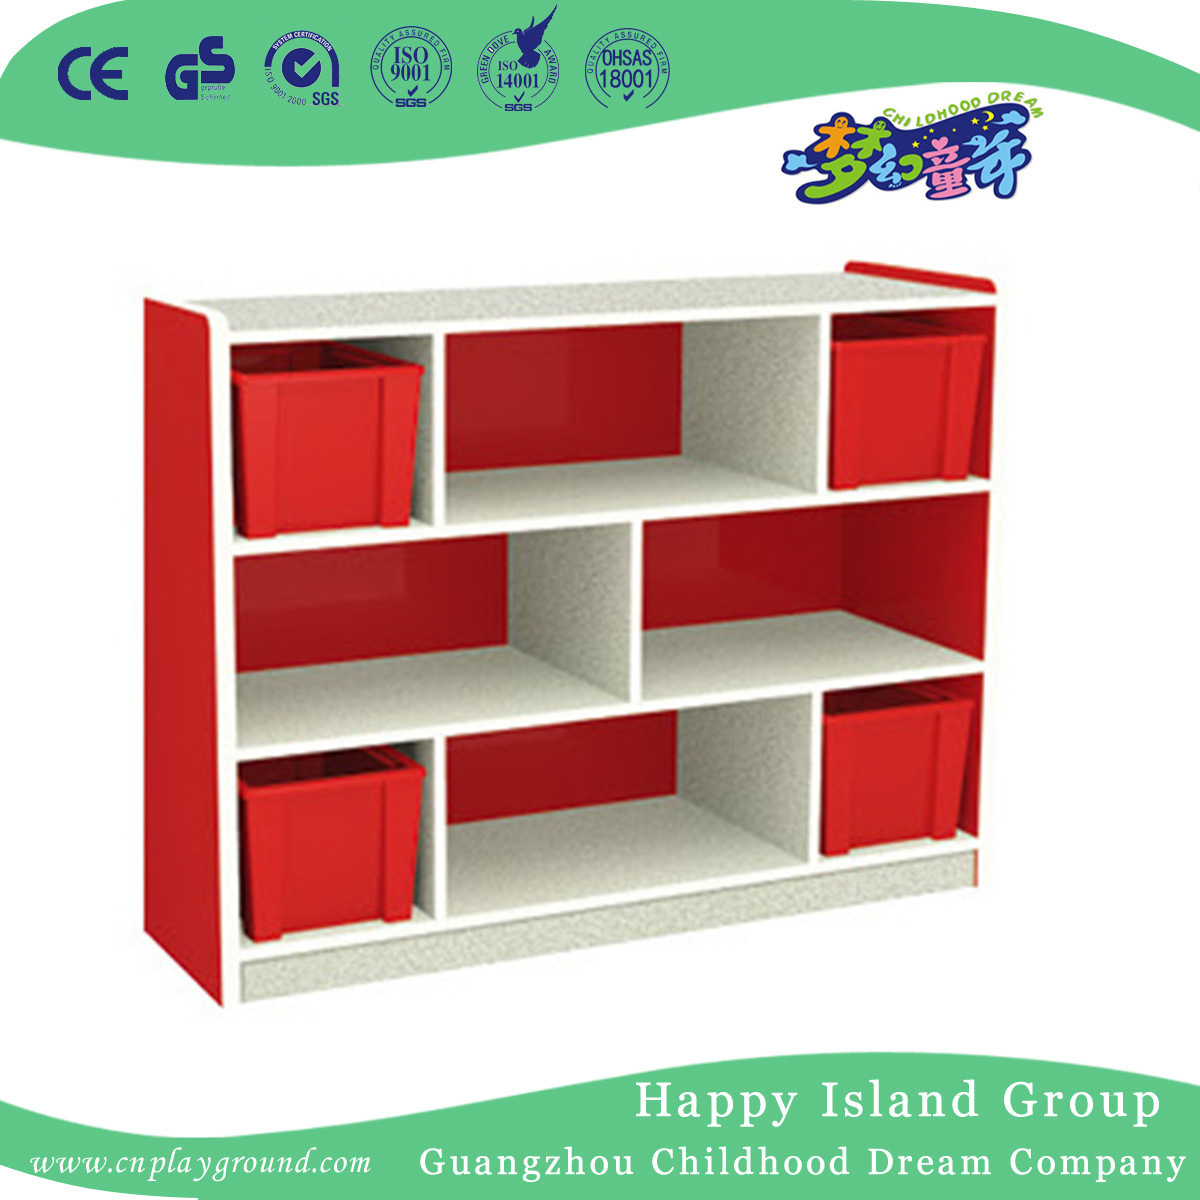 Preschool Red and White Wooden Kids Toys Cabinet (HG-5505)